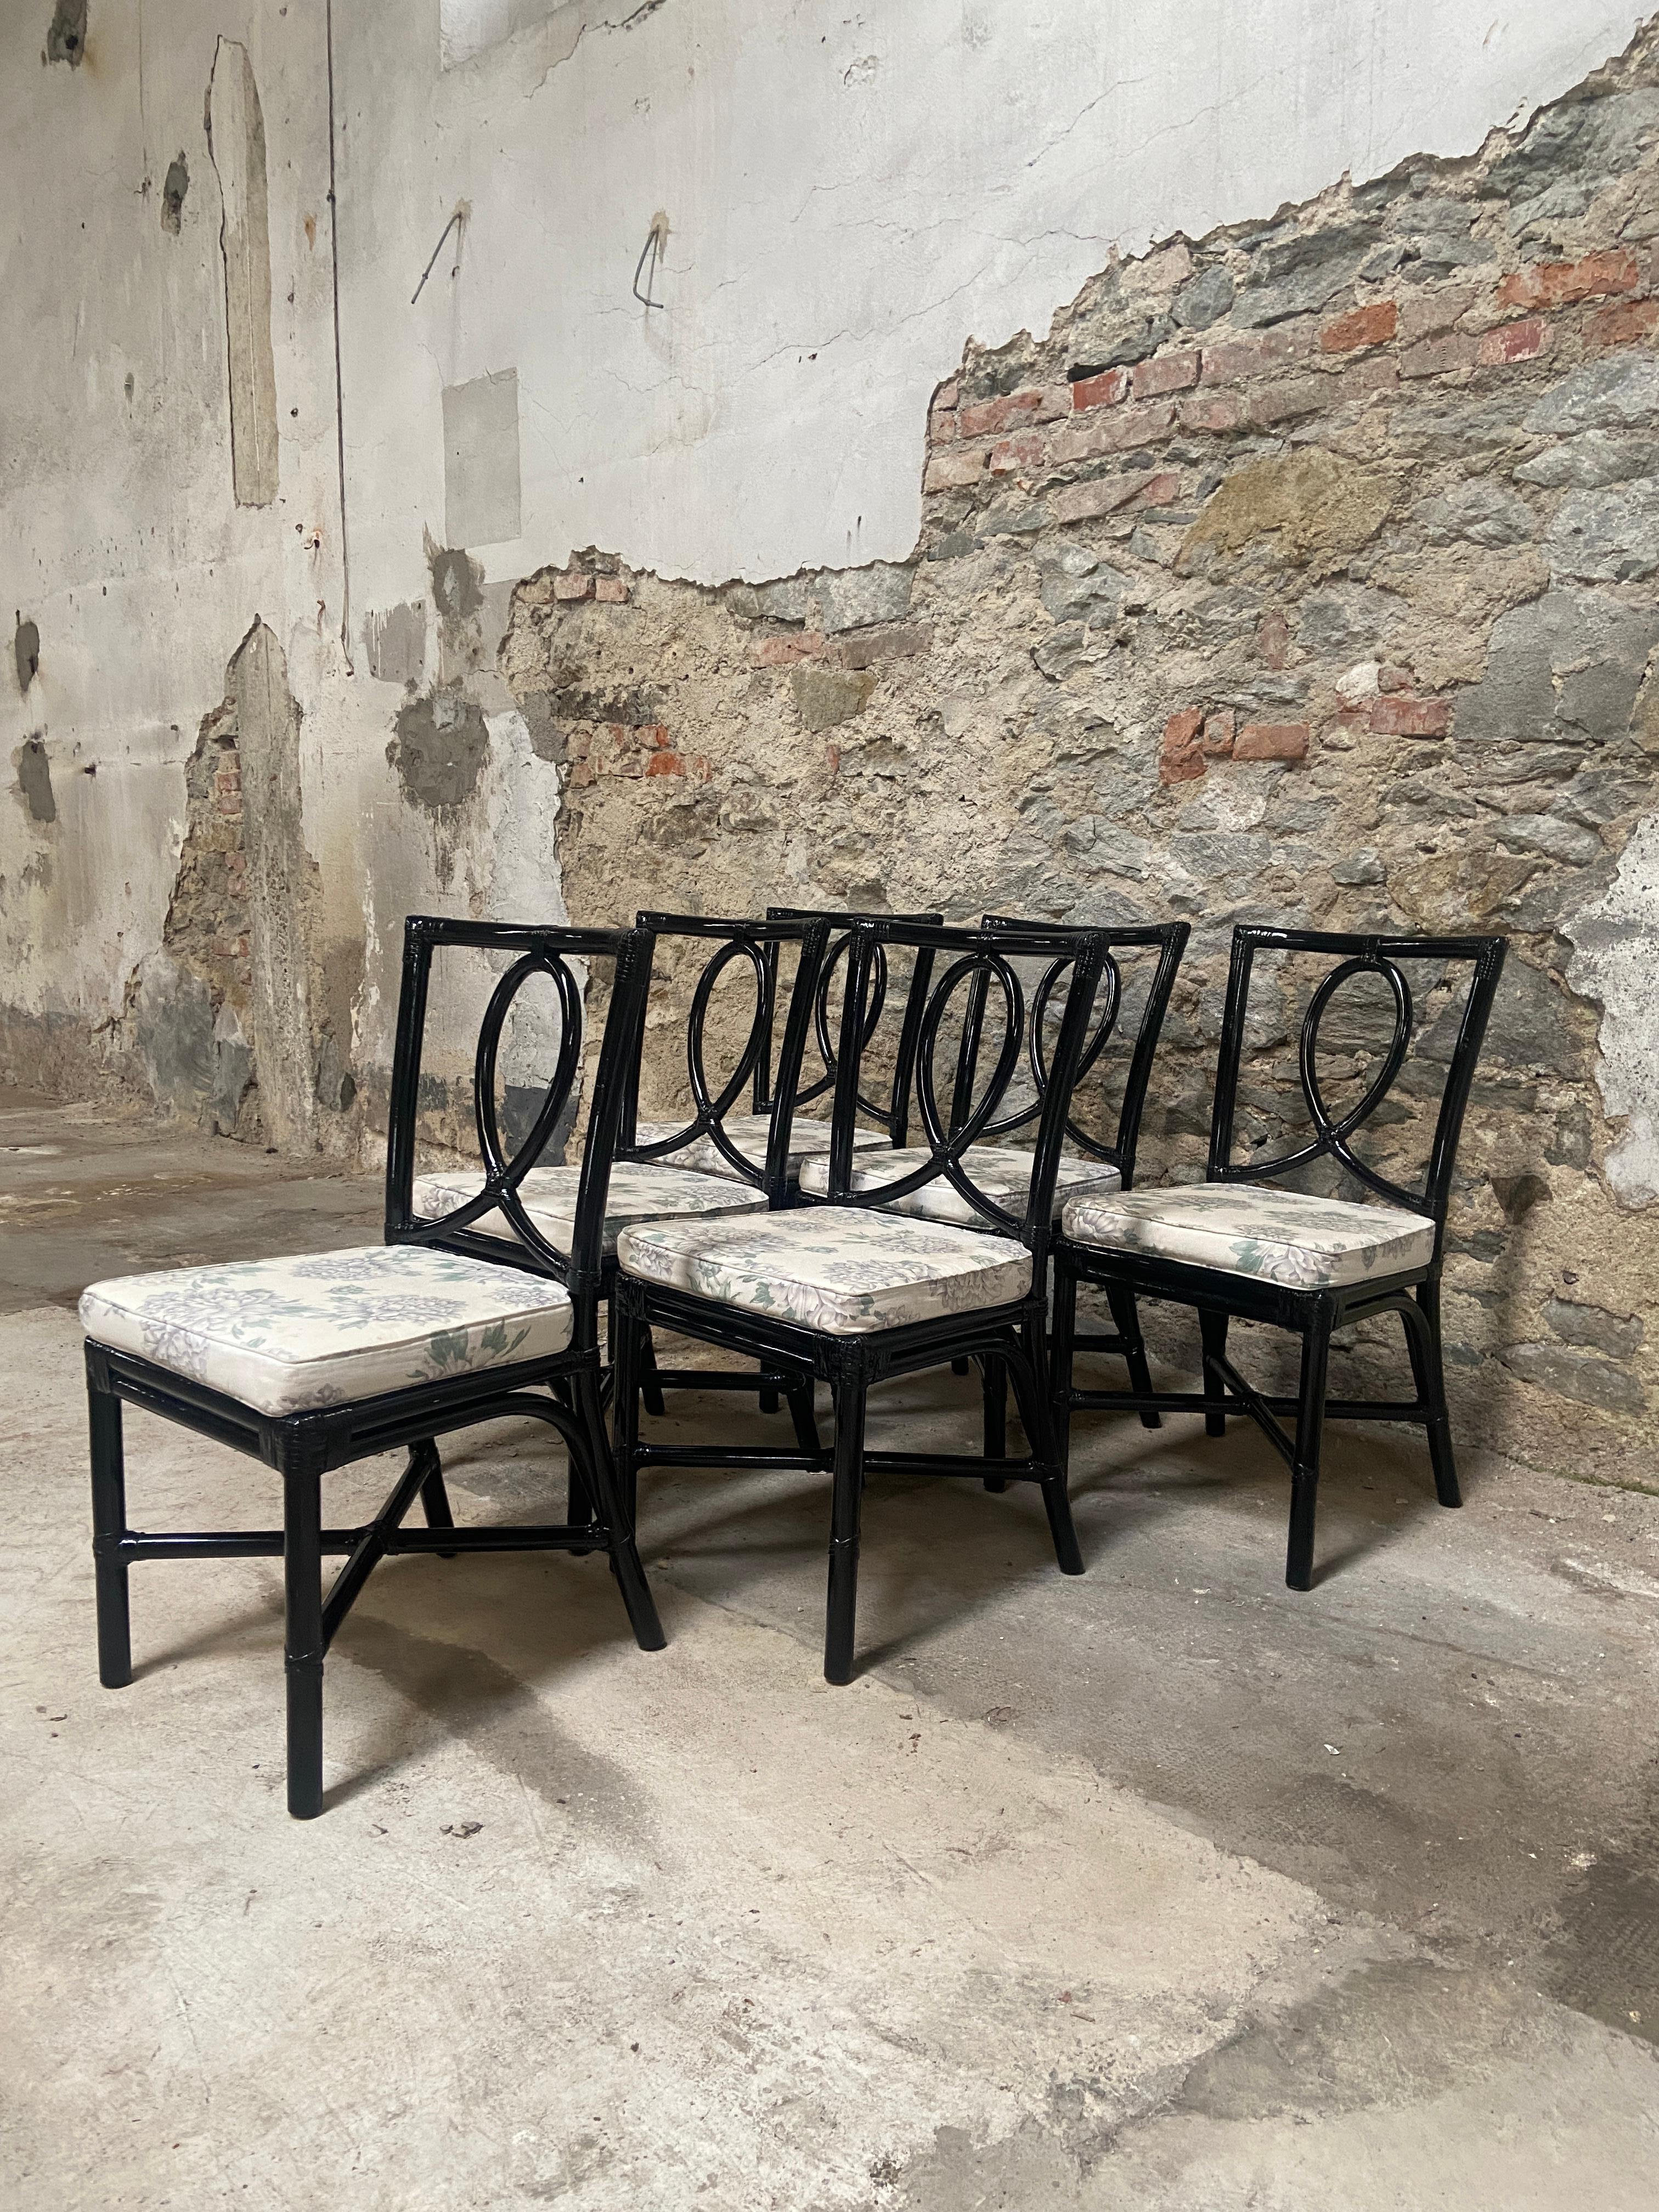 Mid-Century Modern Italian set of 6 shiny black painted bamboo chairs from Vivai del Sud with Original Cotton Fabric Cushions. 1970s
The chairs are in really perfect vintage conditions, the structure is solid and strong like they have never been